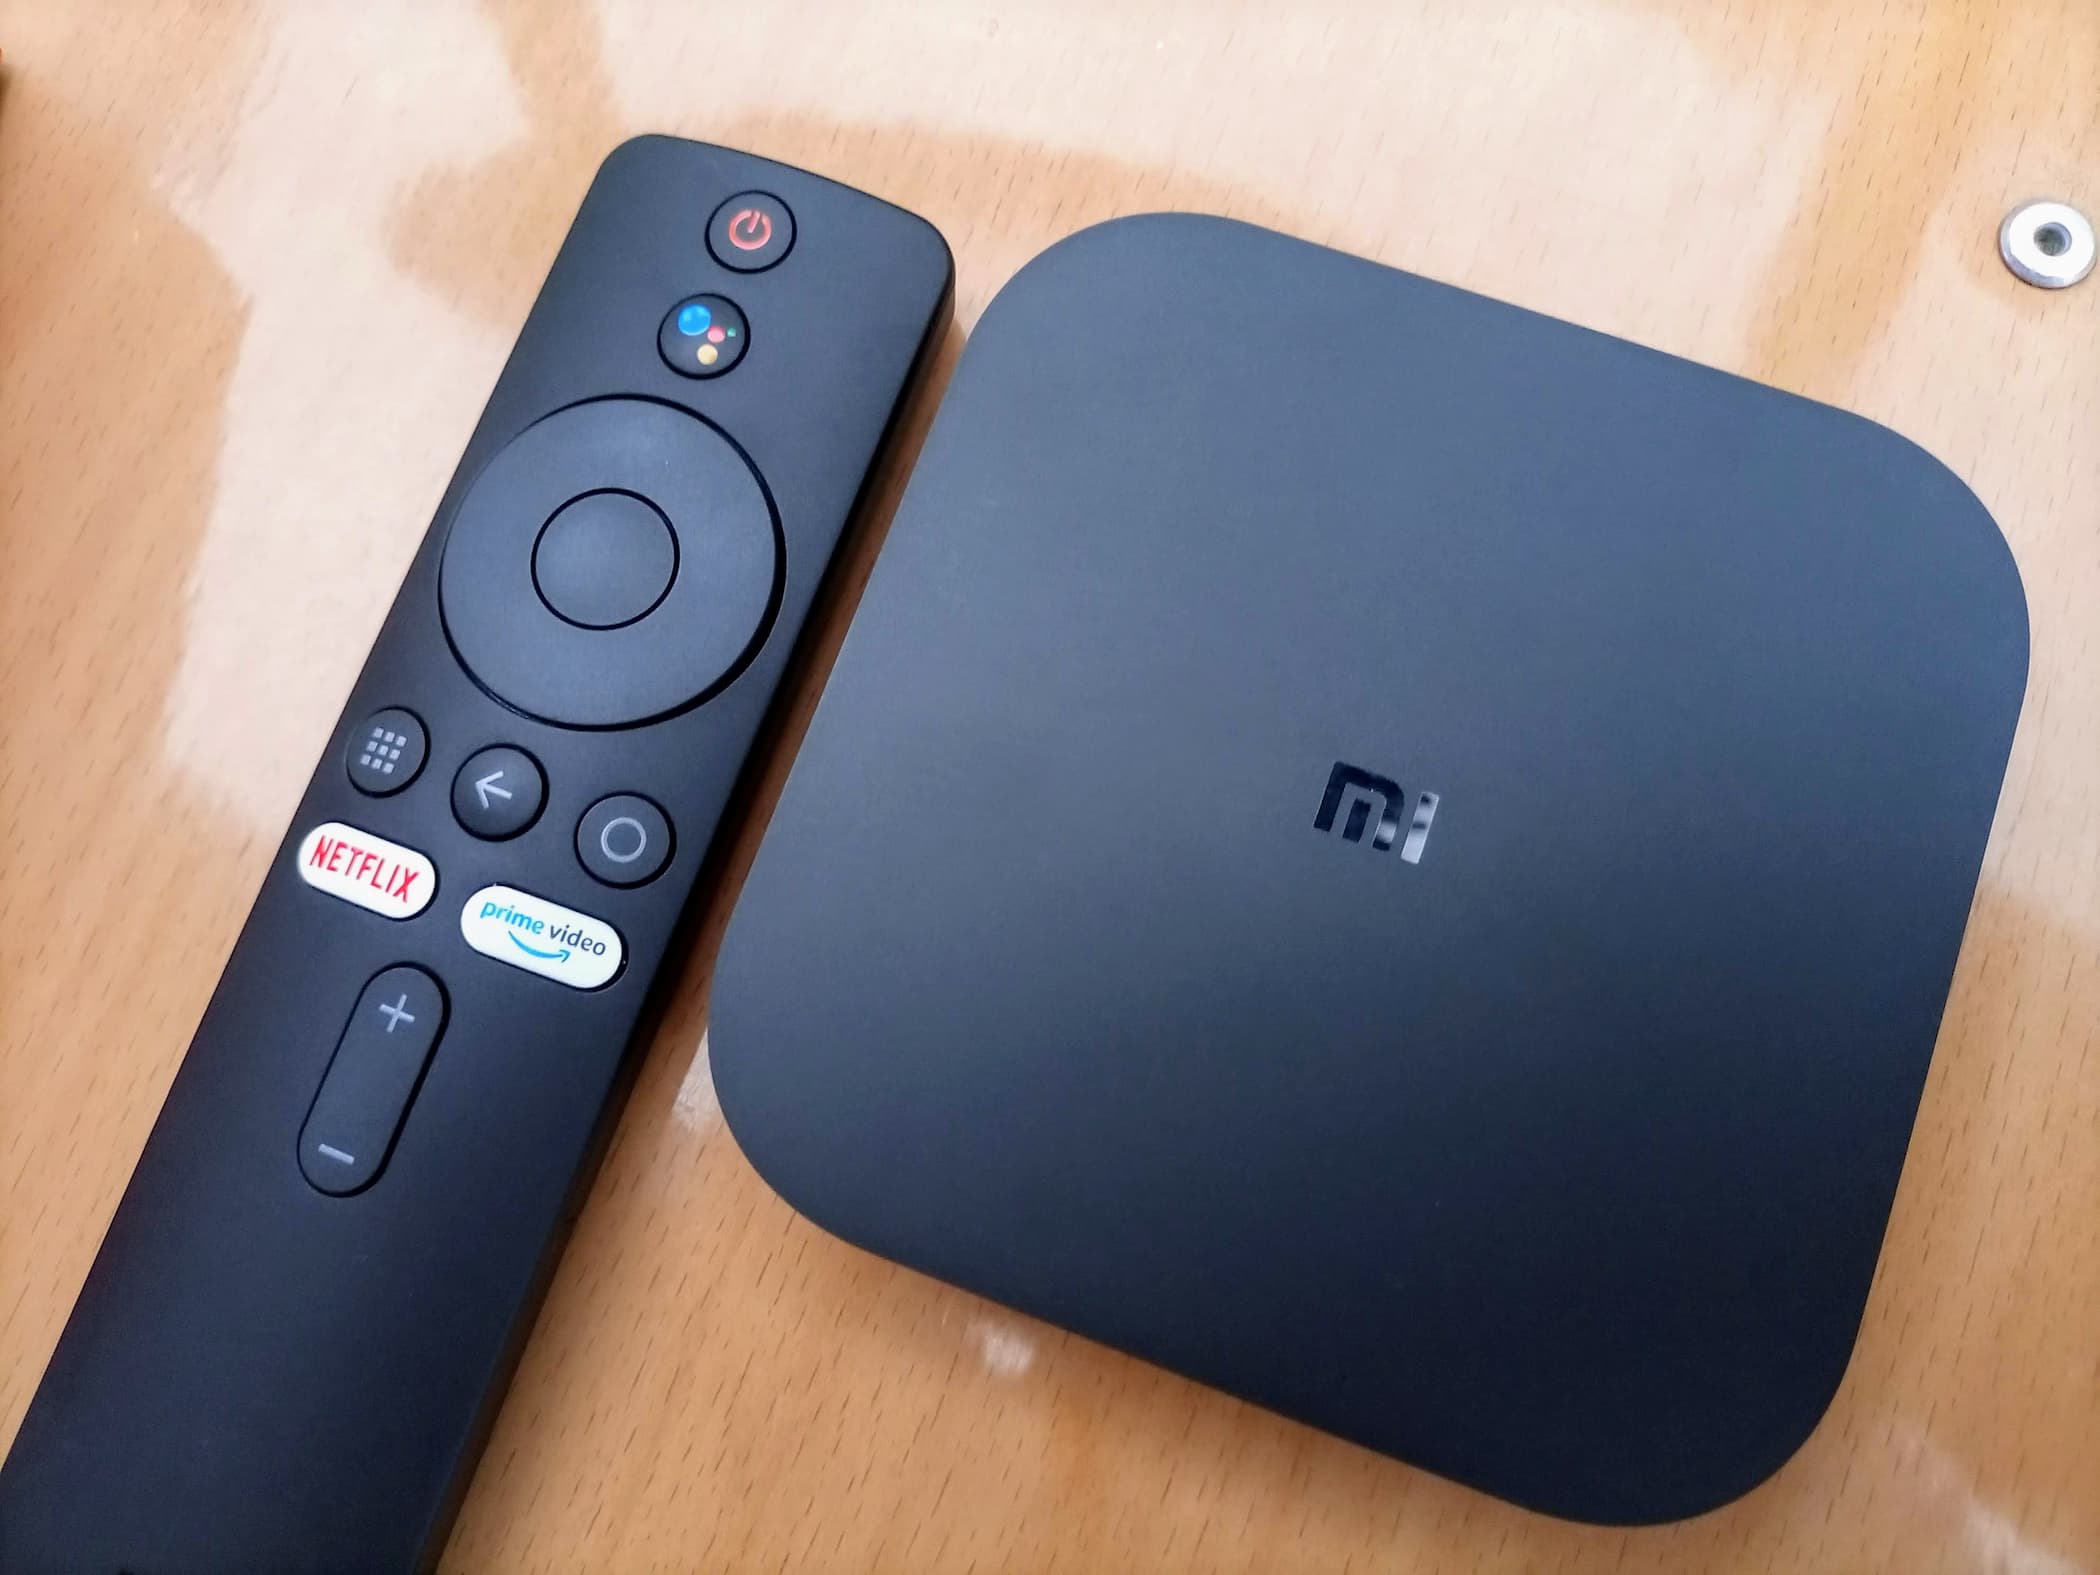 Original Xiaomi Mi Box S 4K upgraded to Android TV 12 from Android